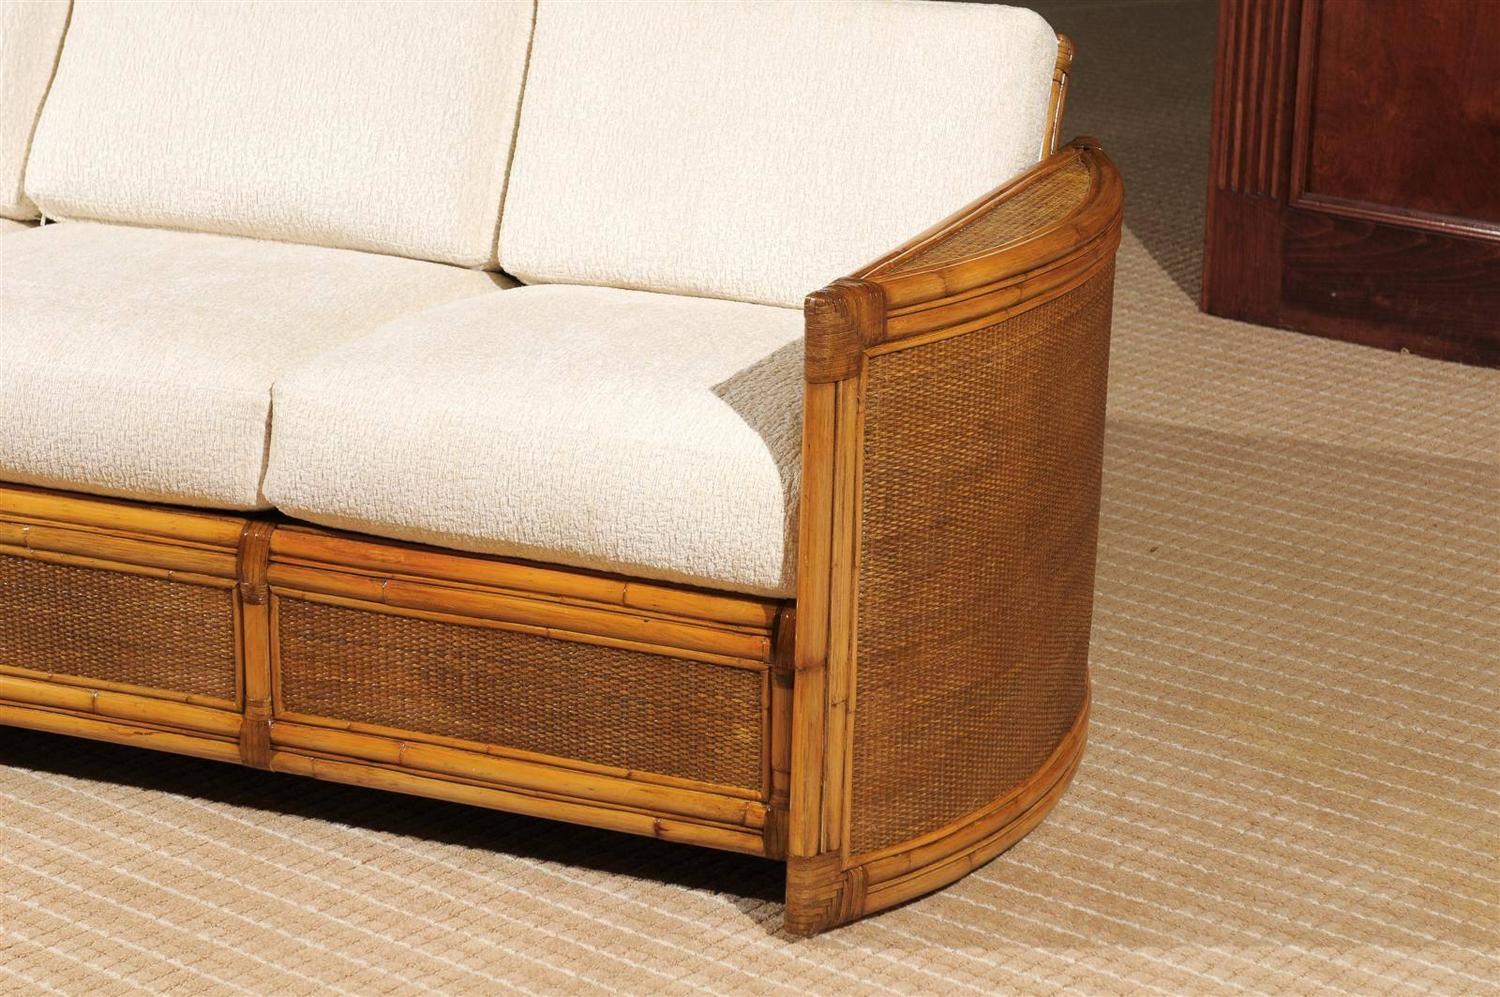 Exceptional Restored Vintage Rattan Sofa For Sale at 1stdibs